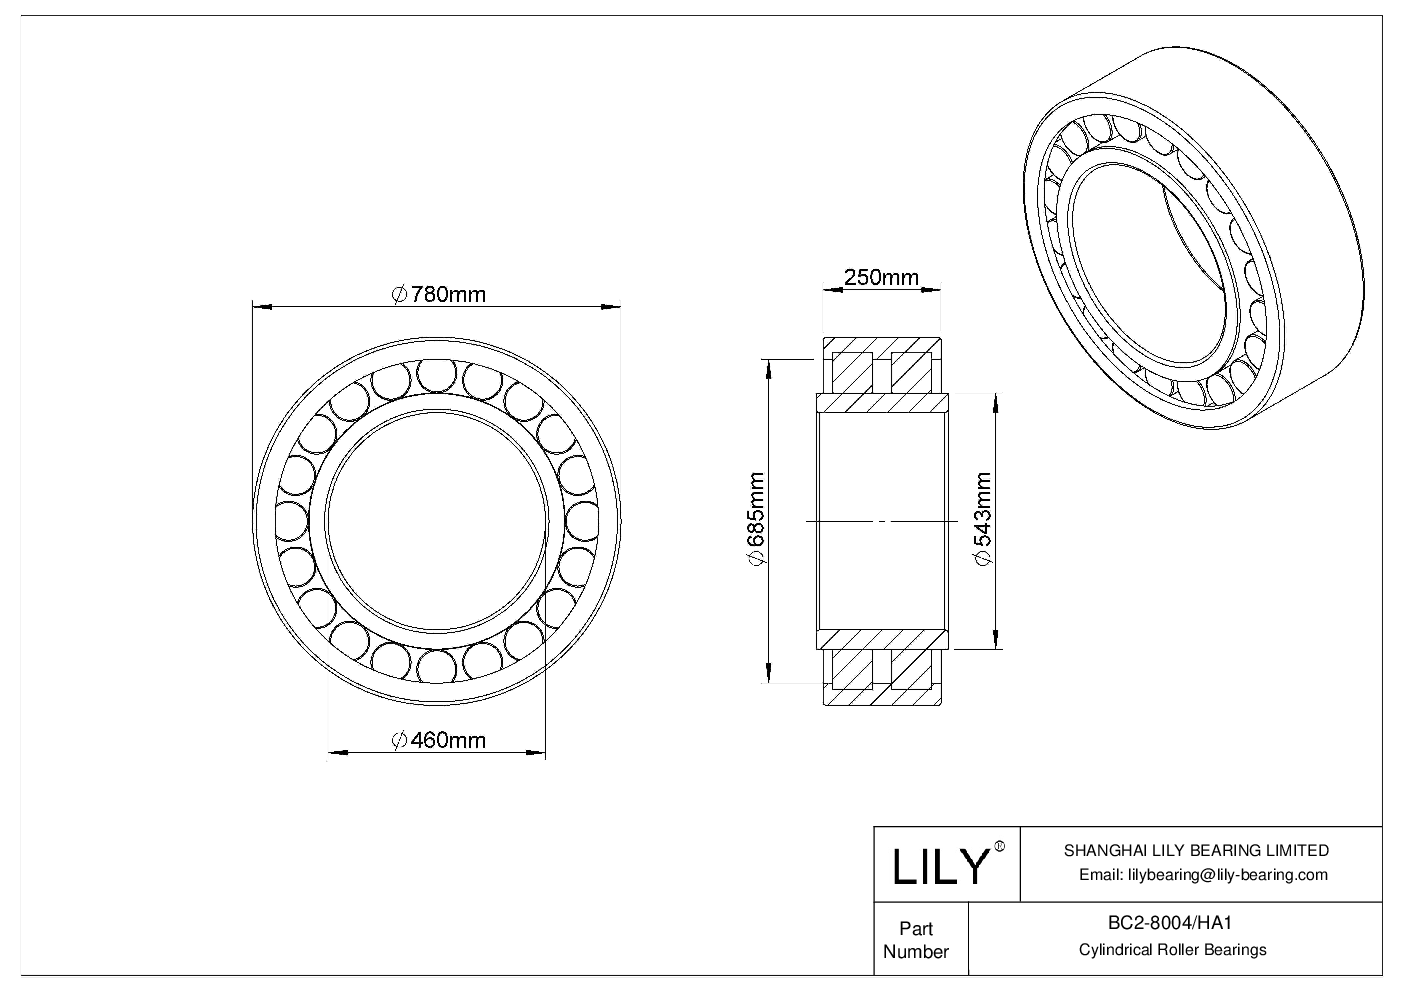 BC2-8004/HA1 Double Row Cylindrical Roller Bearings cad drawing